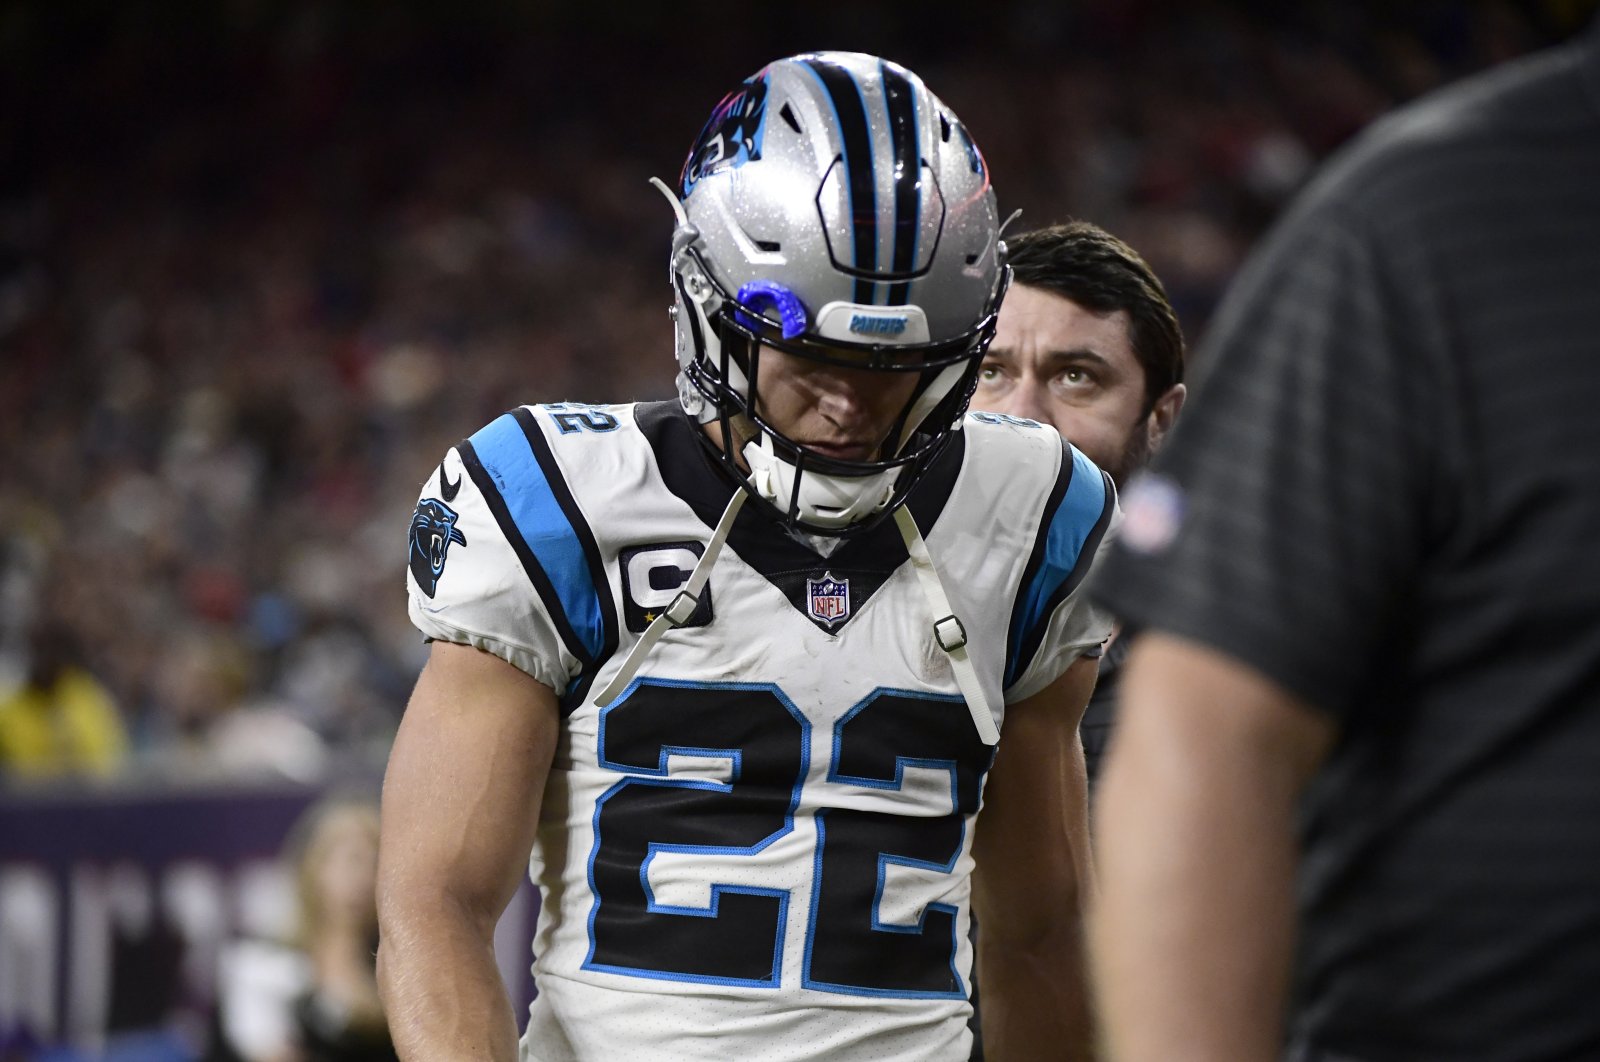 Carolina Panthers running back Christian McCaffrey (22) leaves the field during the first half of an NFL football game against the Houston Texans at NRG Stadium, Houston, Texas, U.S., Sept. 23, 2021. (AP Photo)